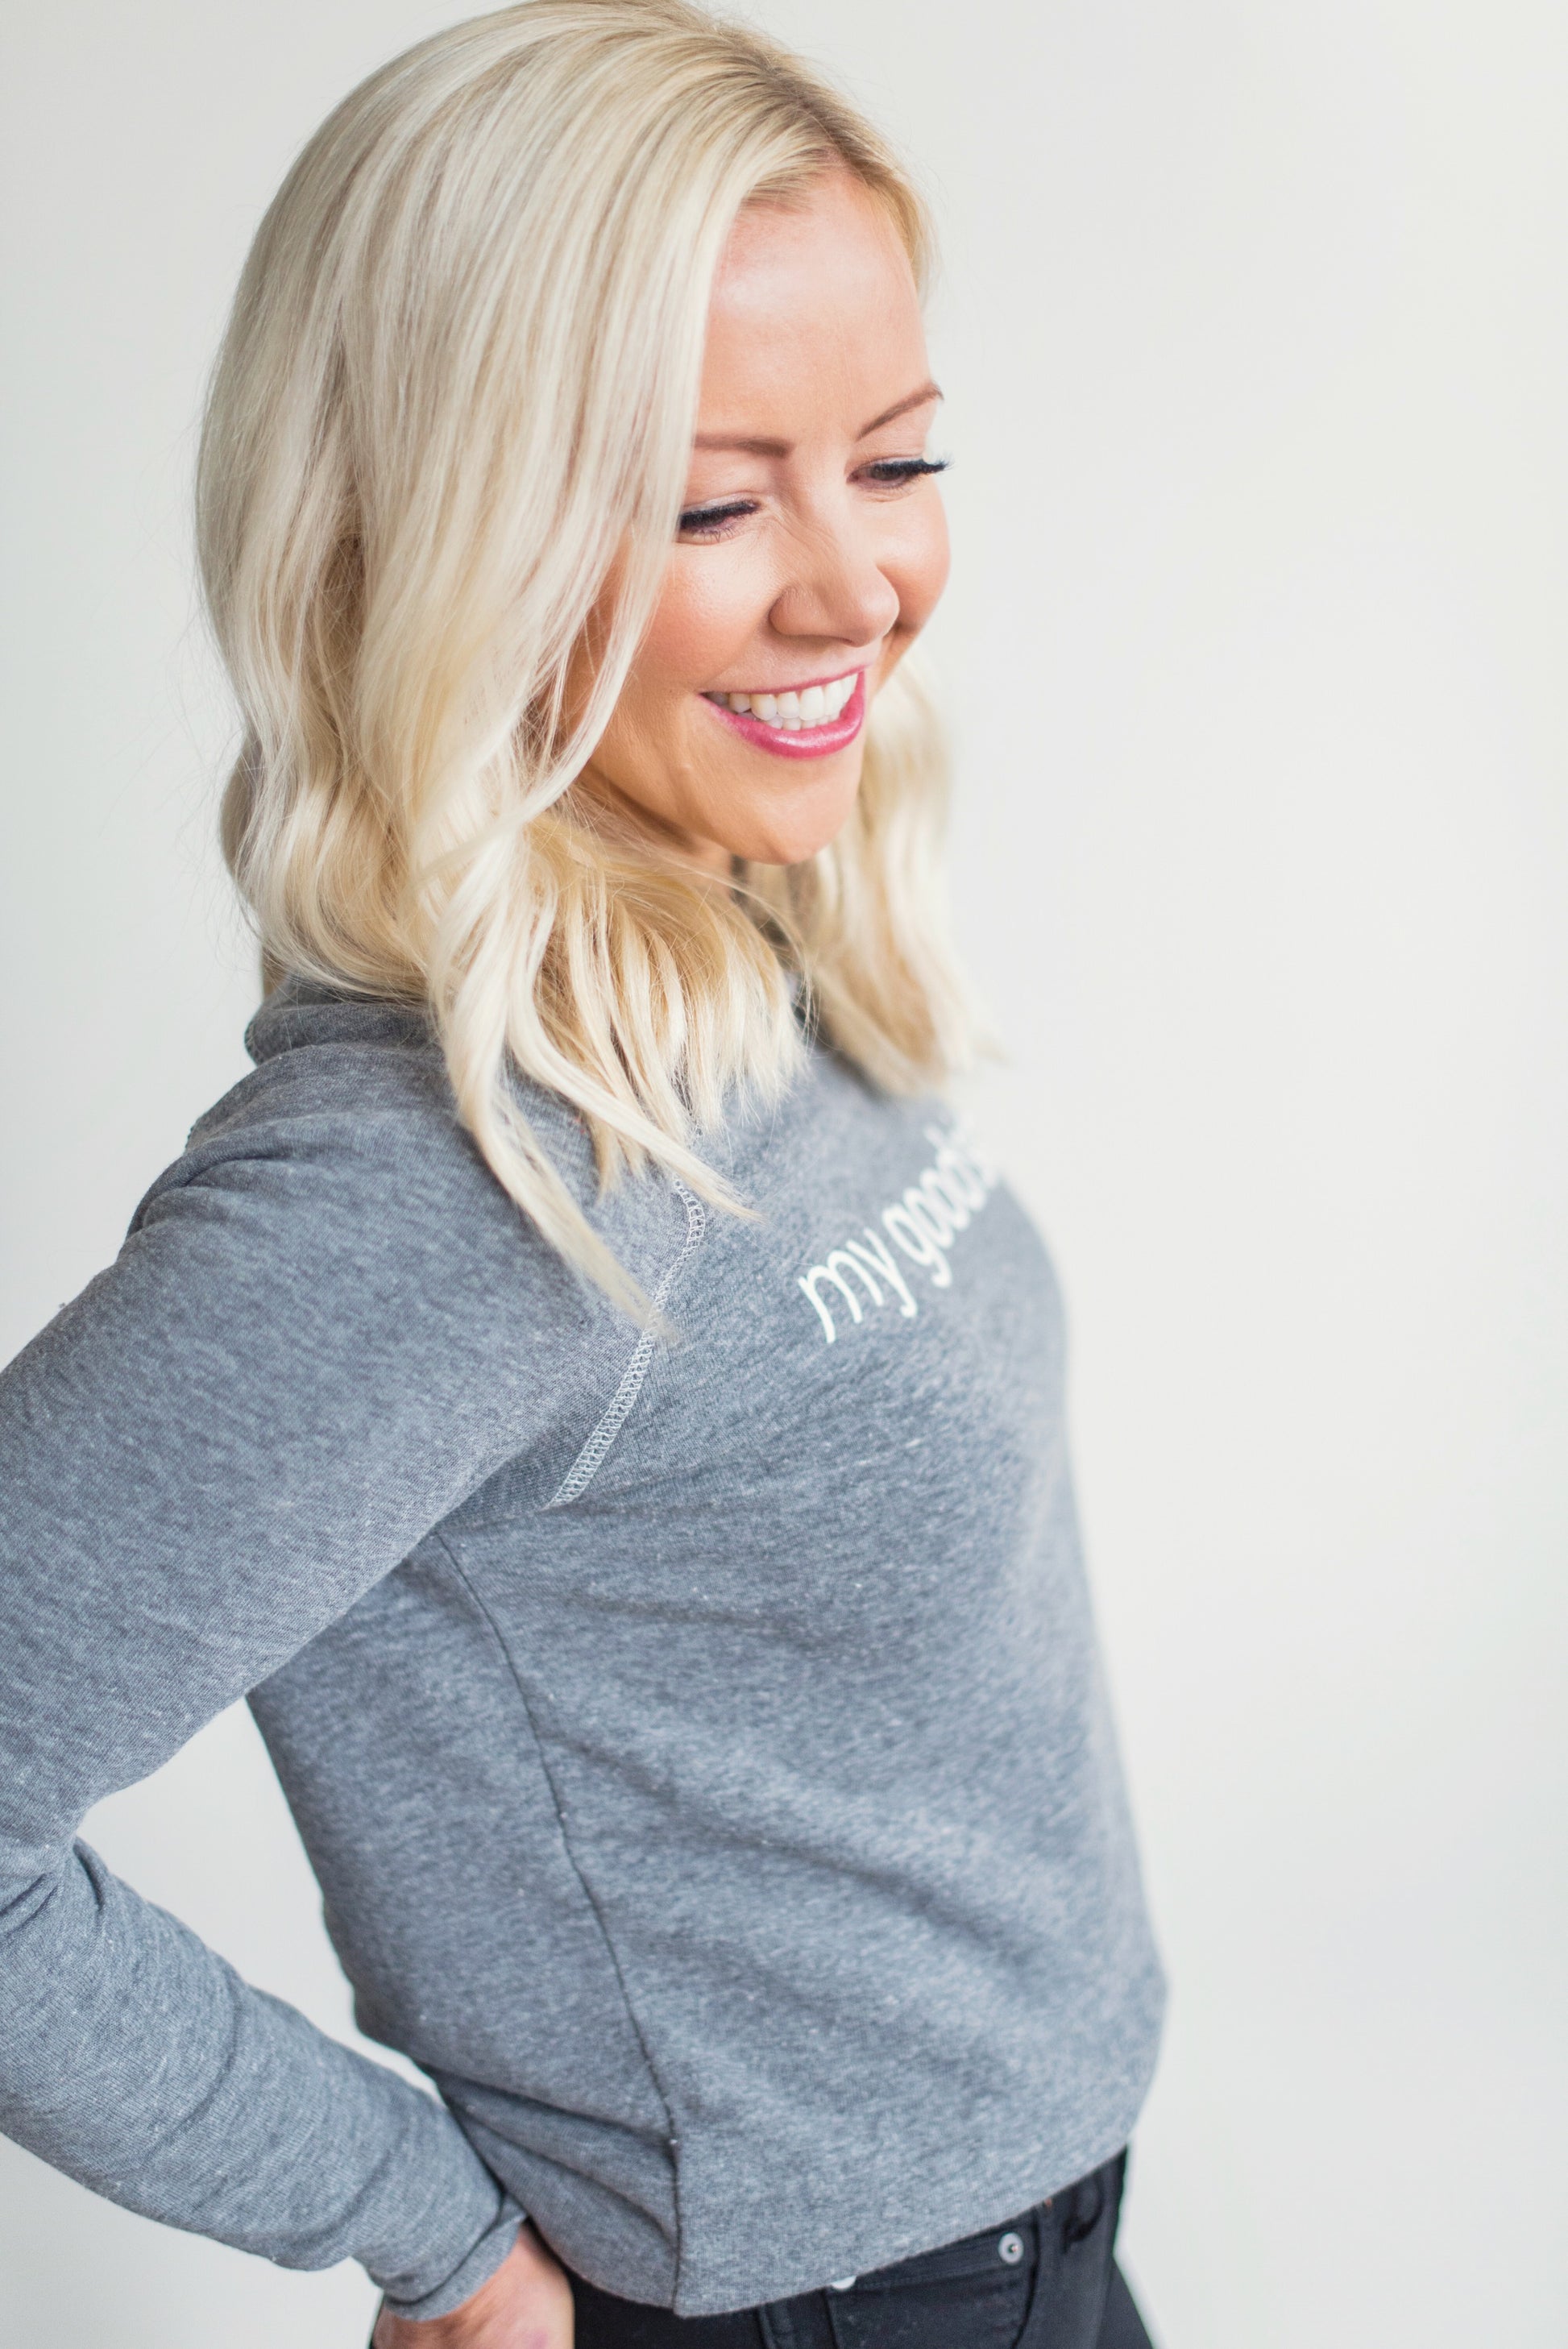 Side view of Courtney wearing her grey sweatshirt with the words 'my good side' that can be purchased on the website.